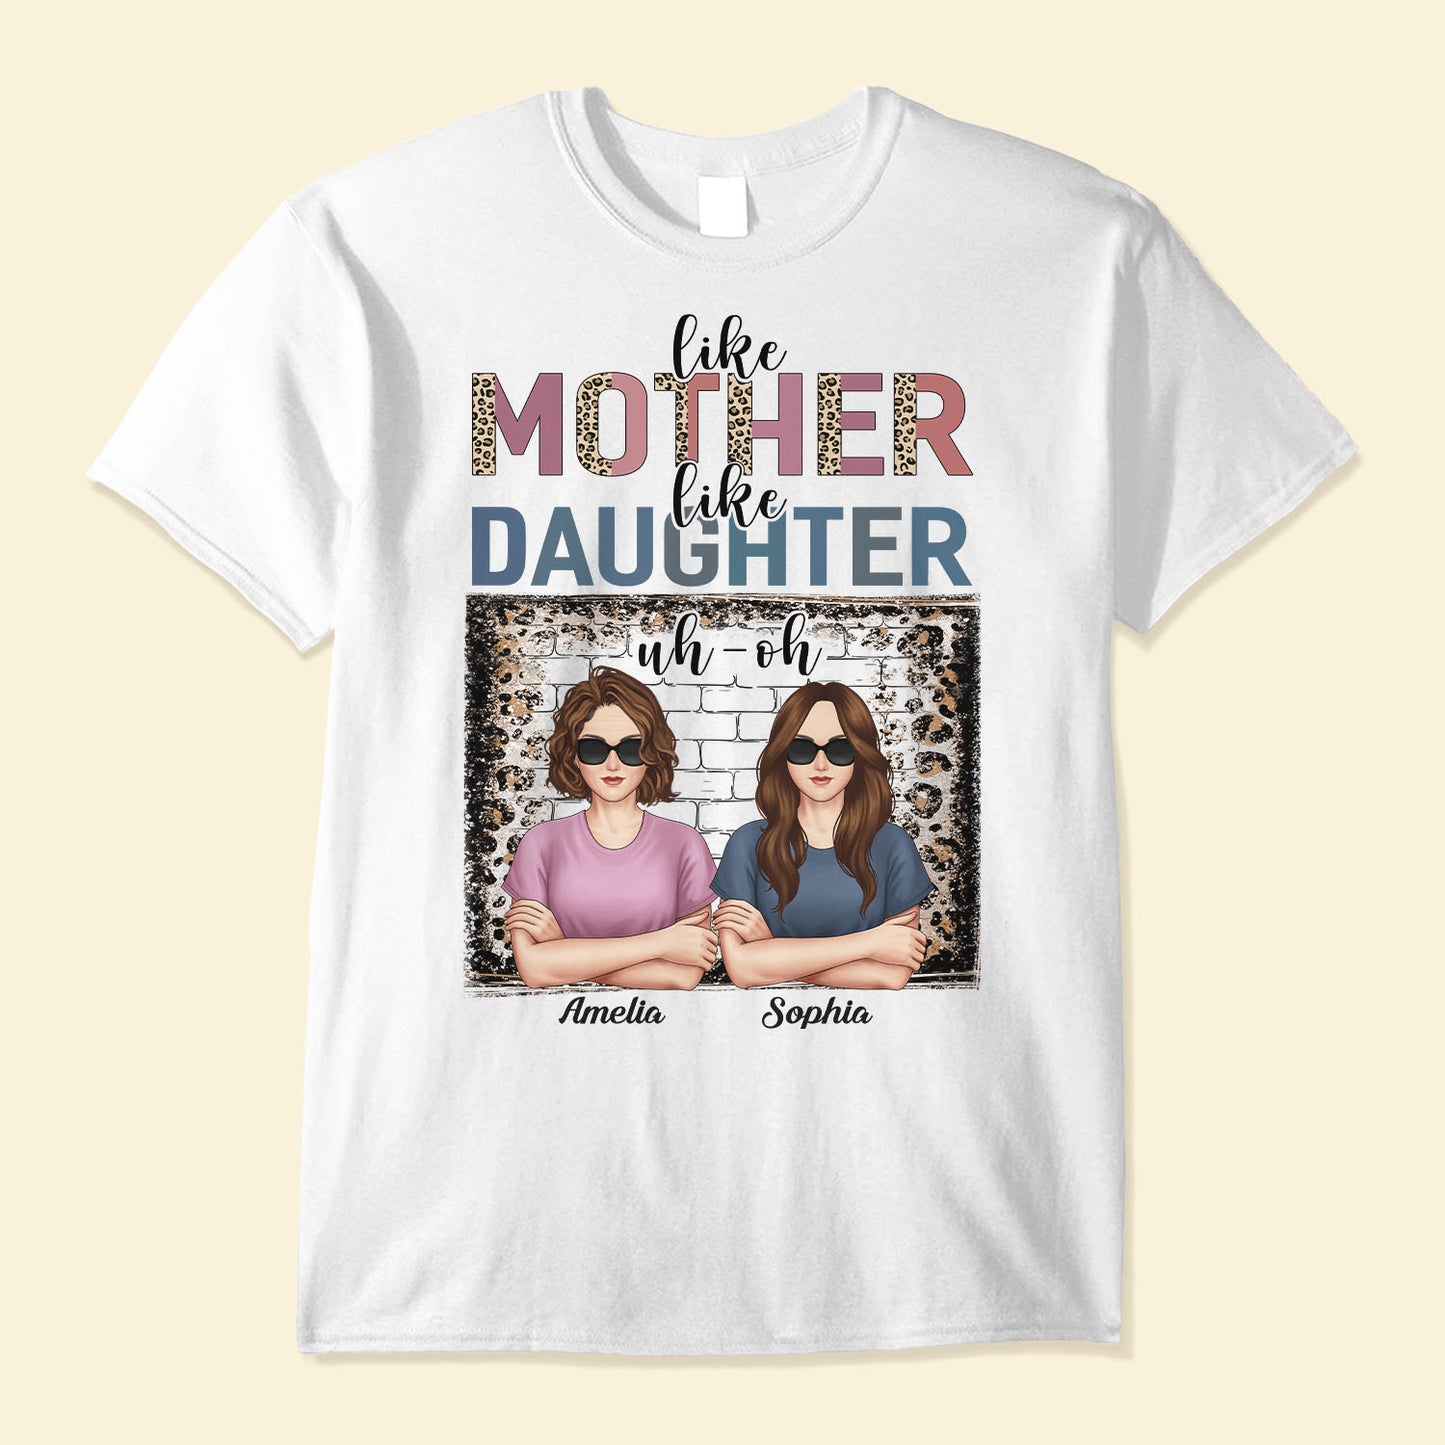 Mother And Daughter - Personalized Shirt - Mother's Day, Birthday, Christmas Gift For Mom, Daughter, Mother, Mama